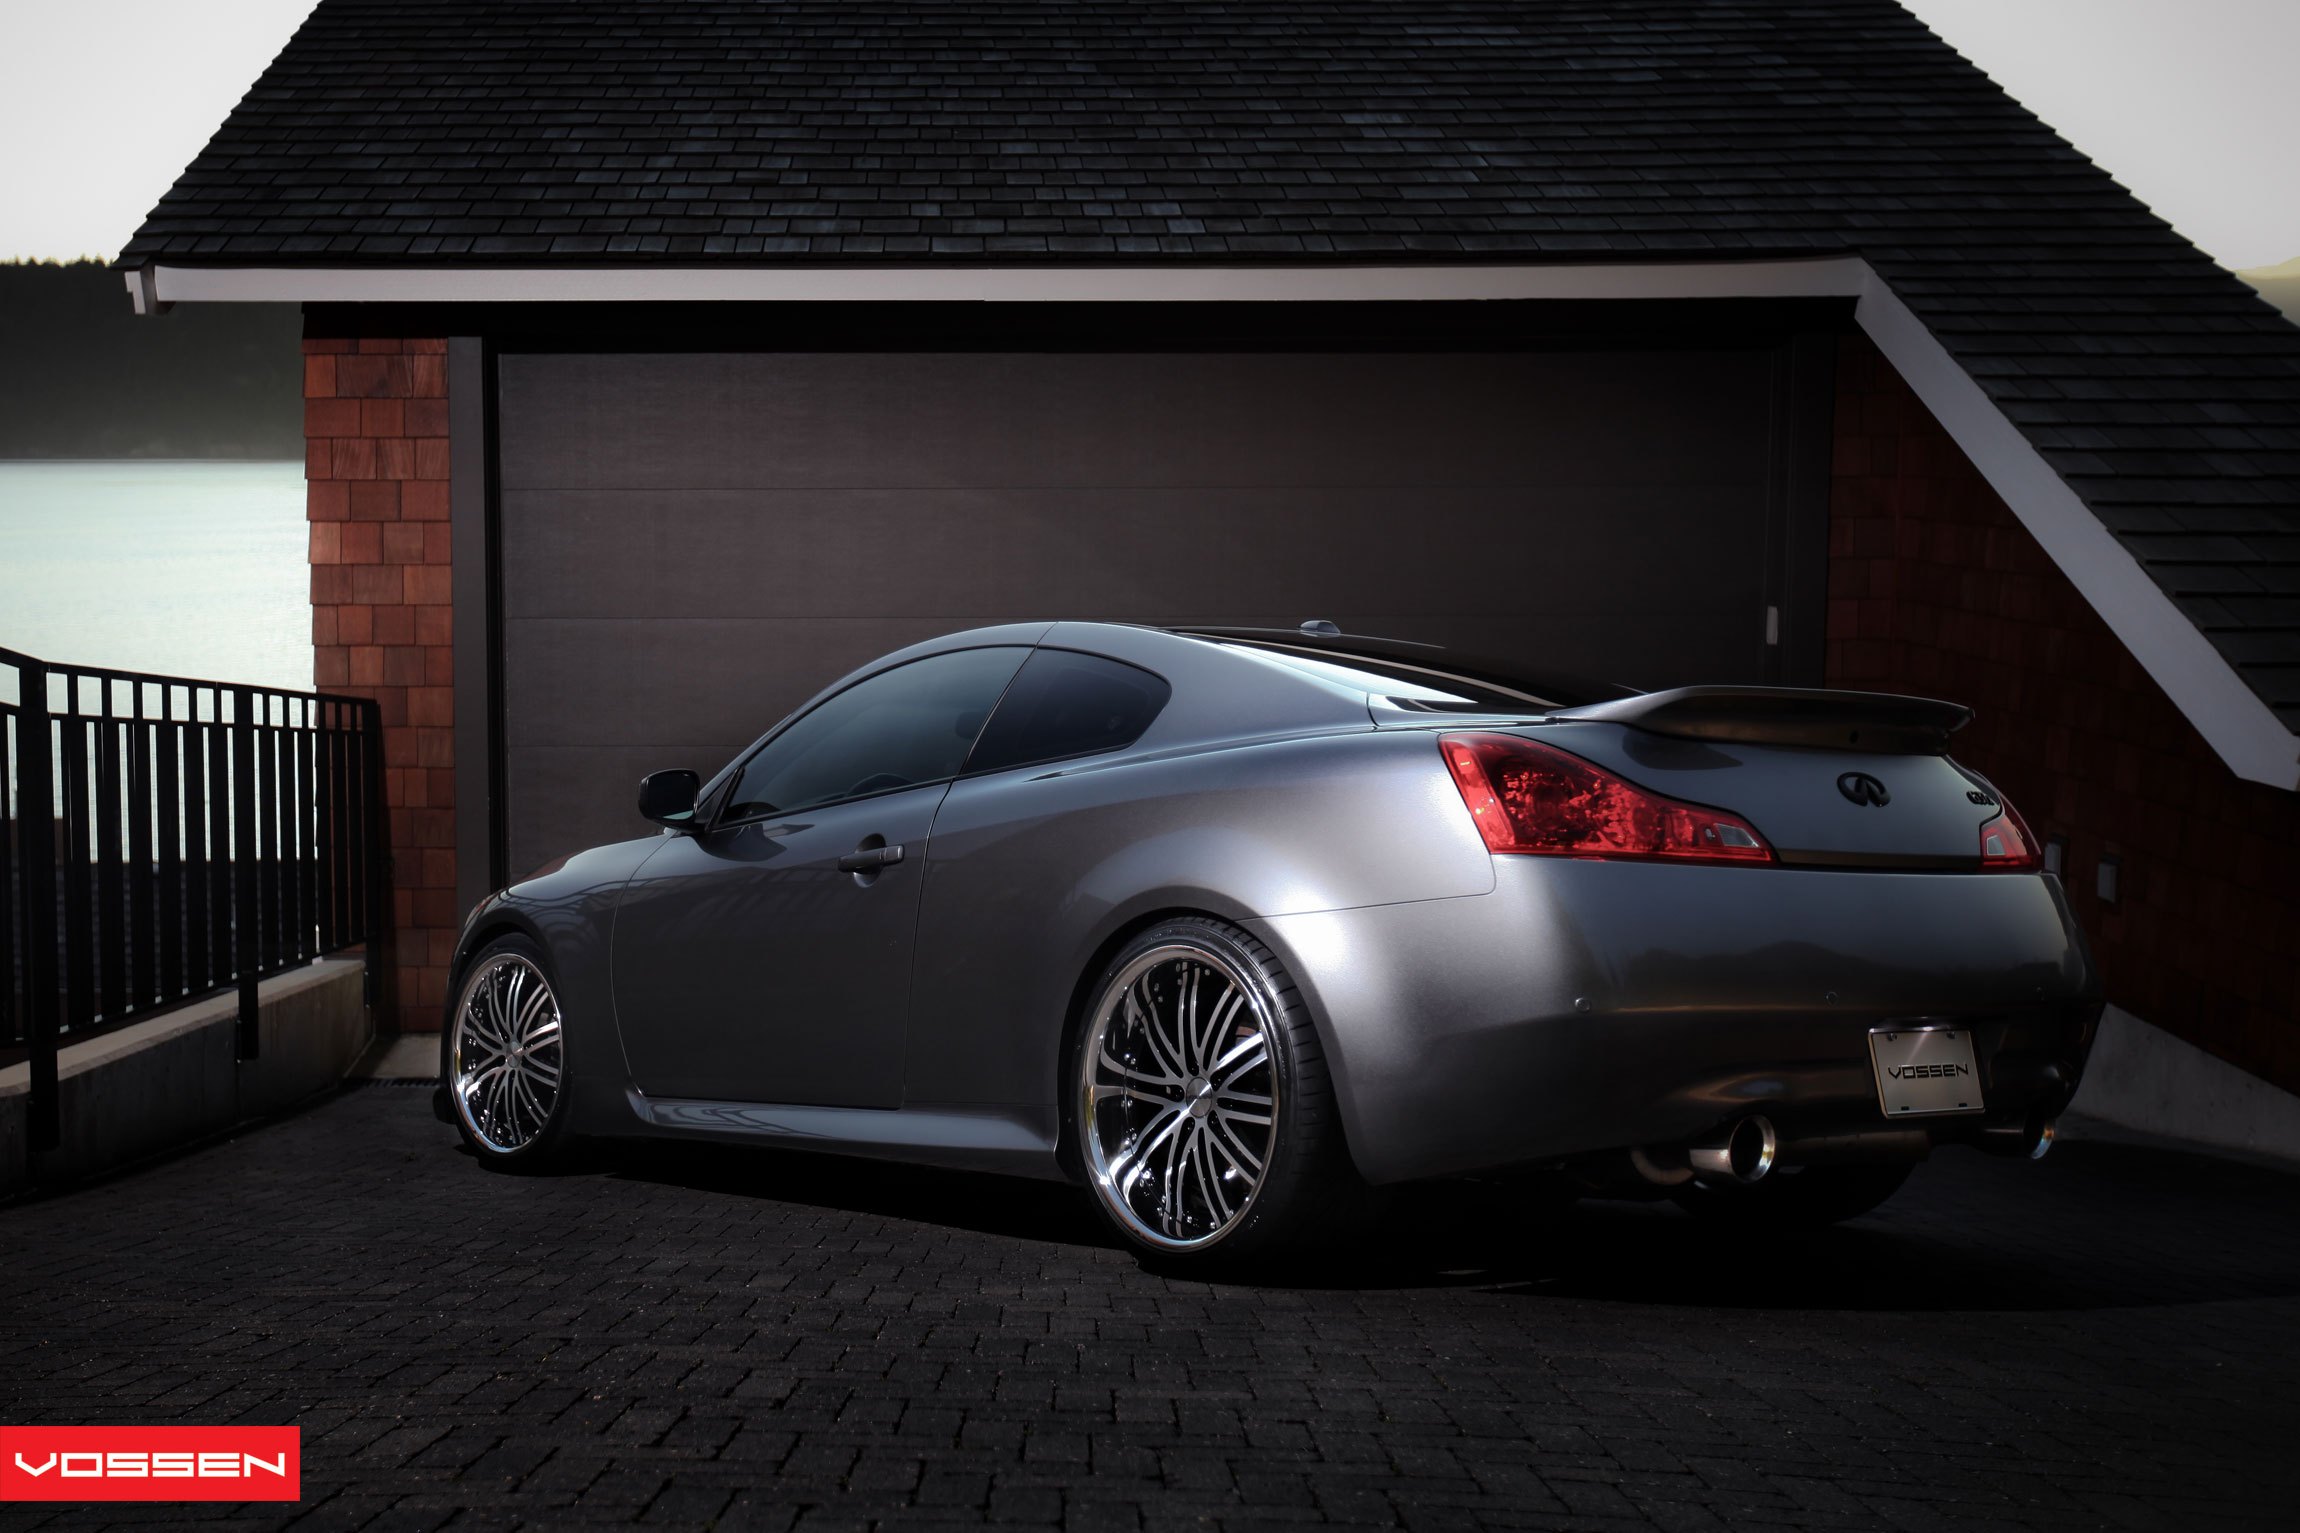 Silver Stanced Infiniti G37 with Custom Exhaust System - Photo by Vossen